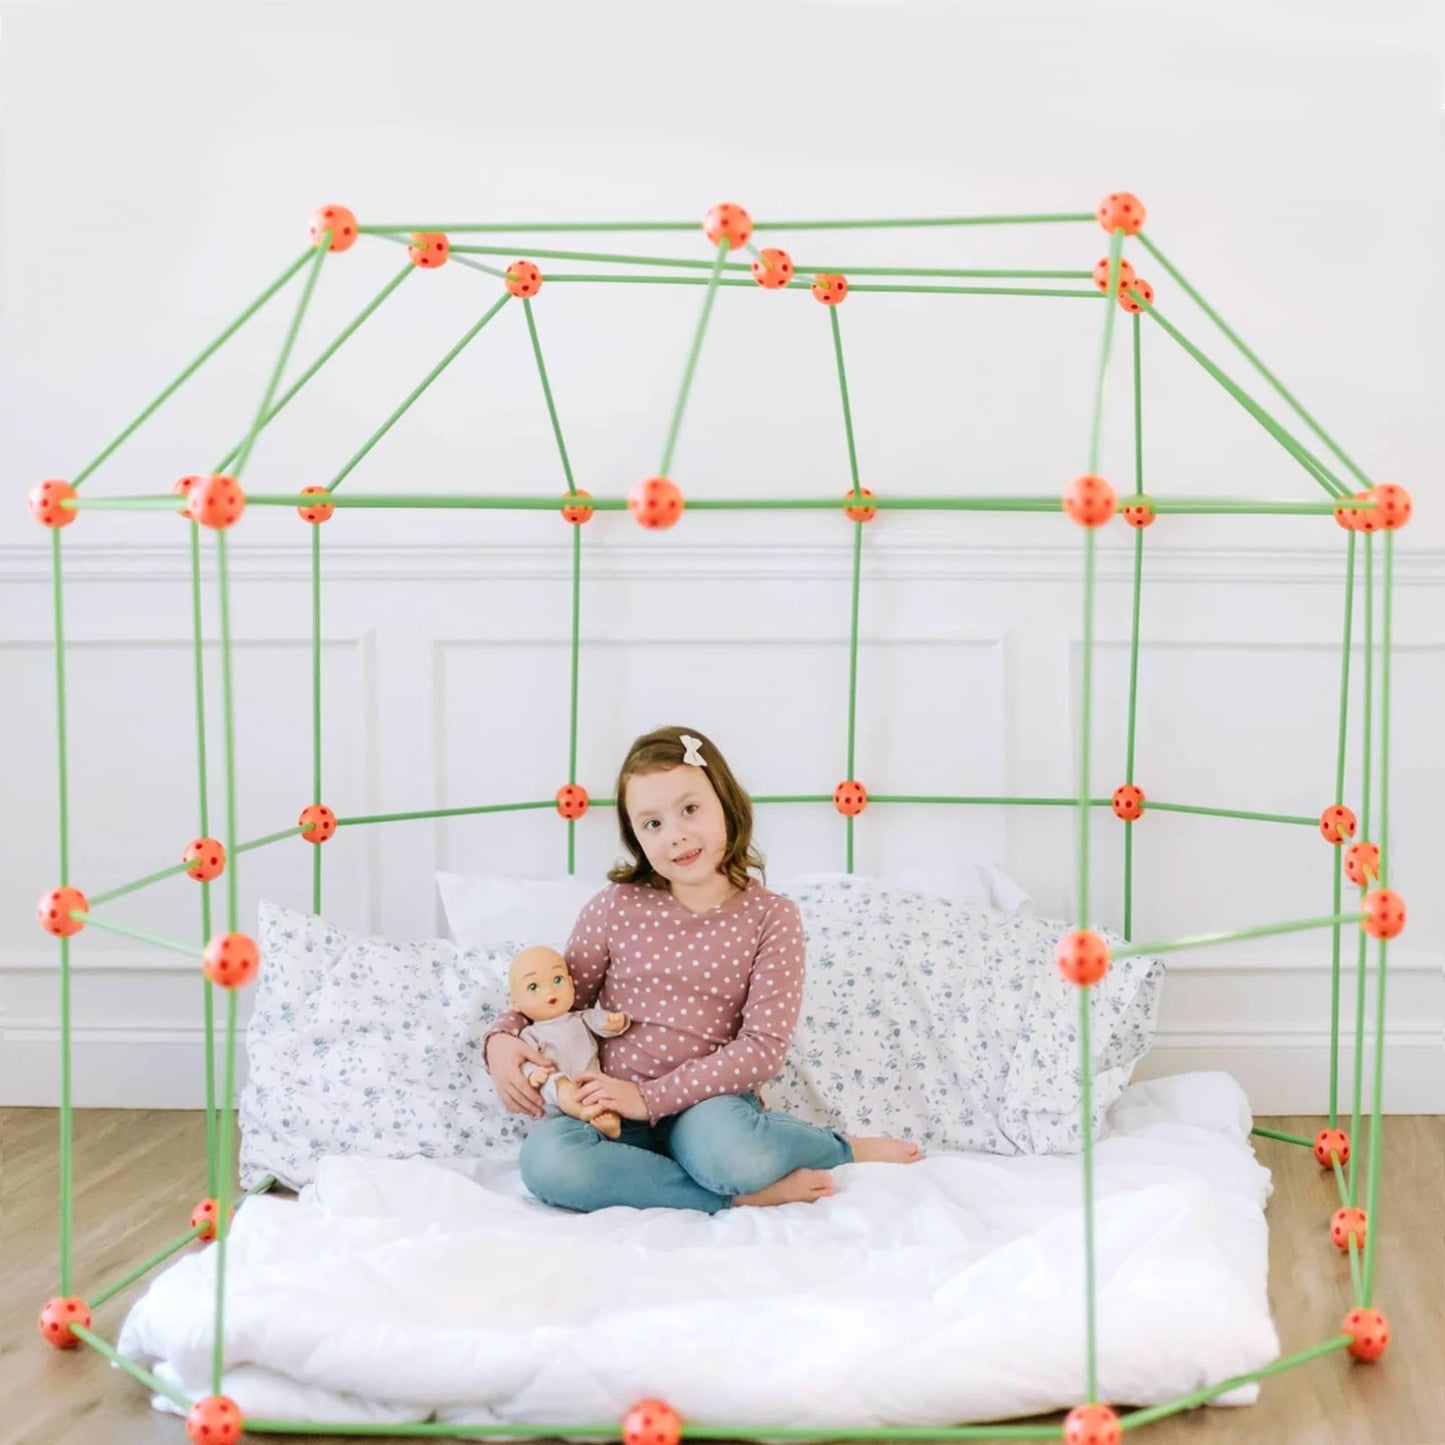 Fort Building Kit | Tiny Land | Creative Forts | All for Kids